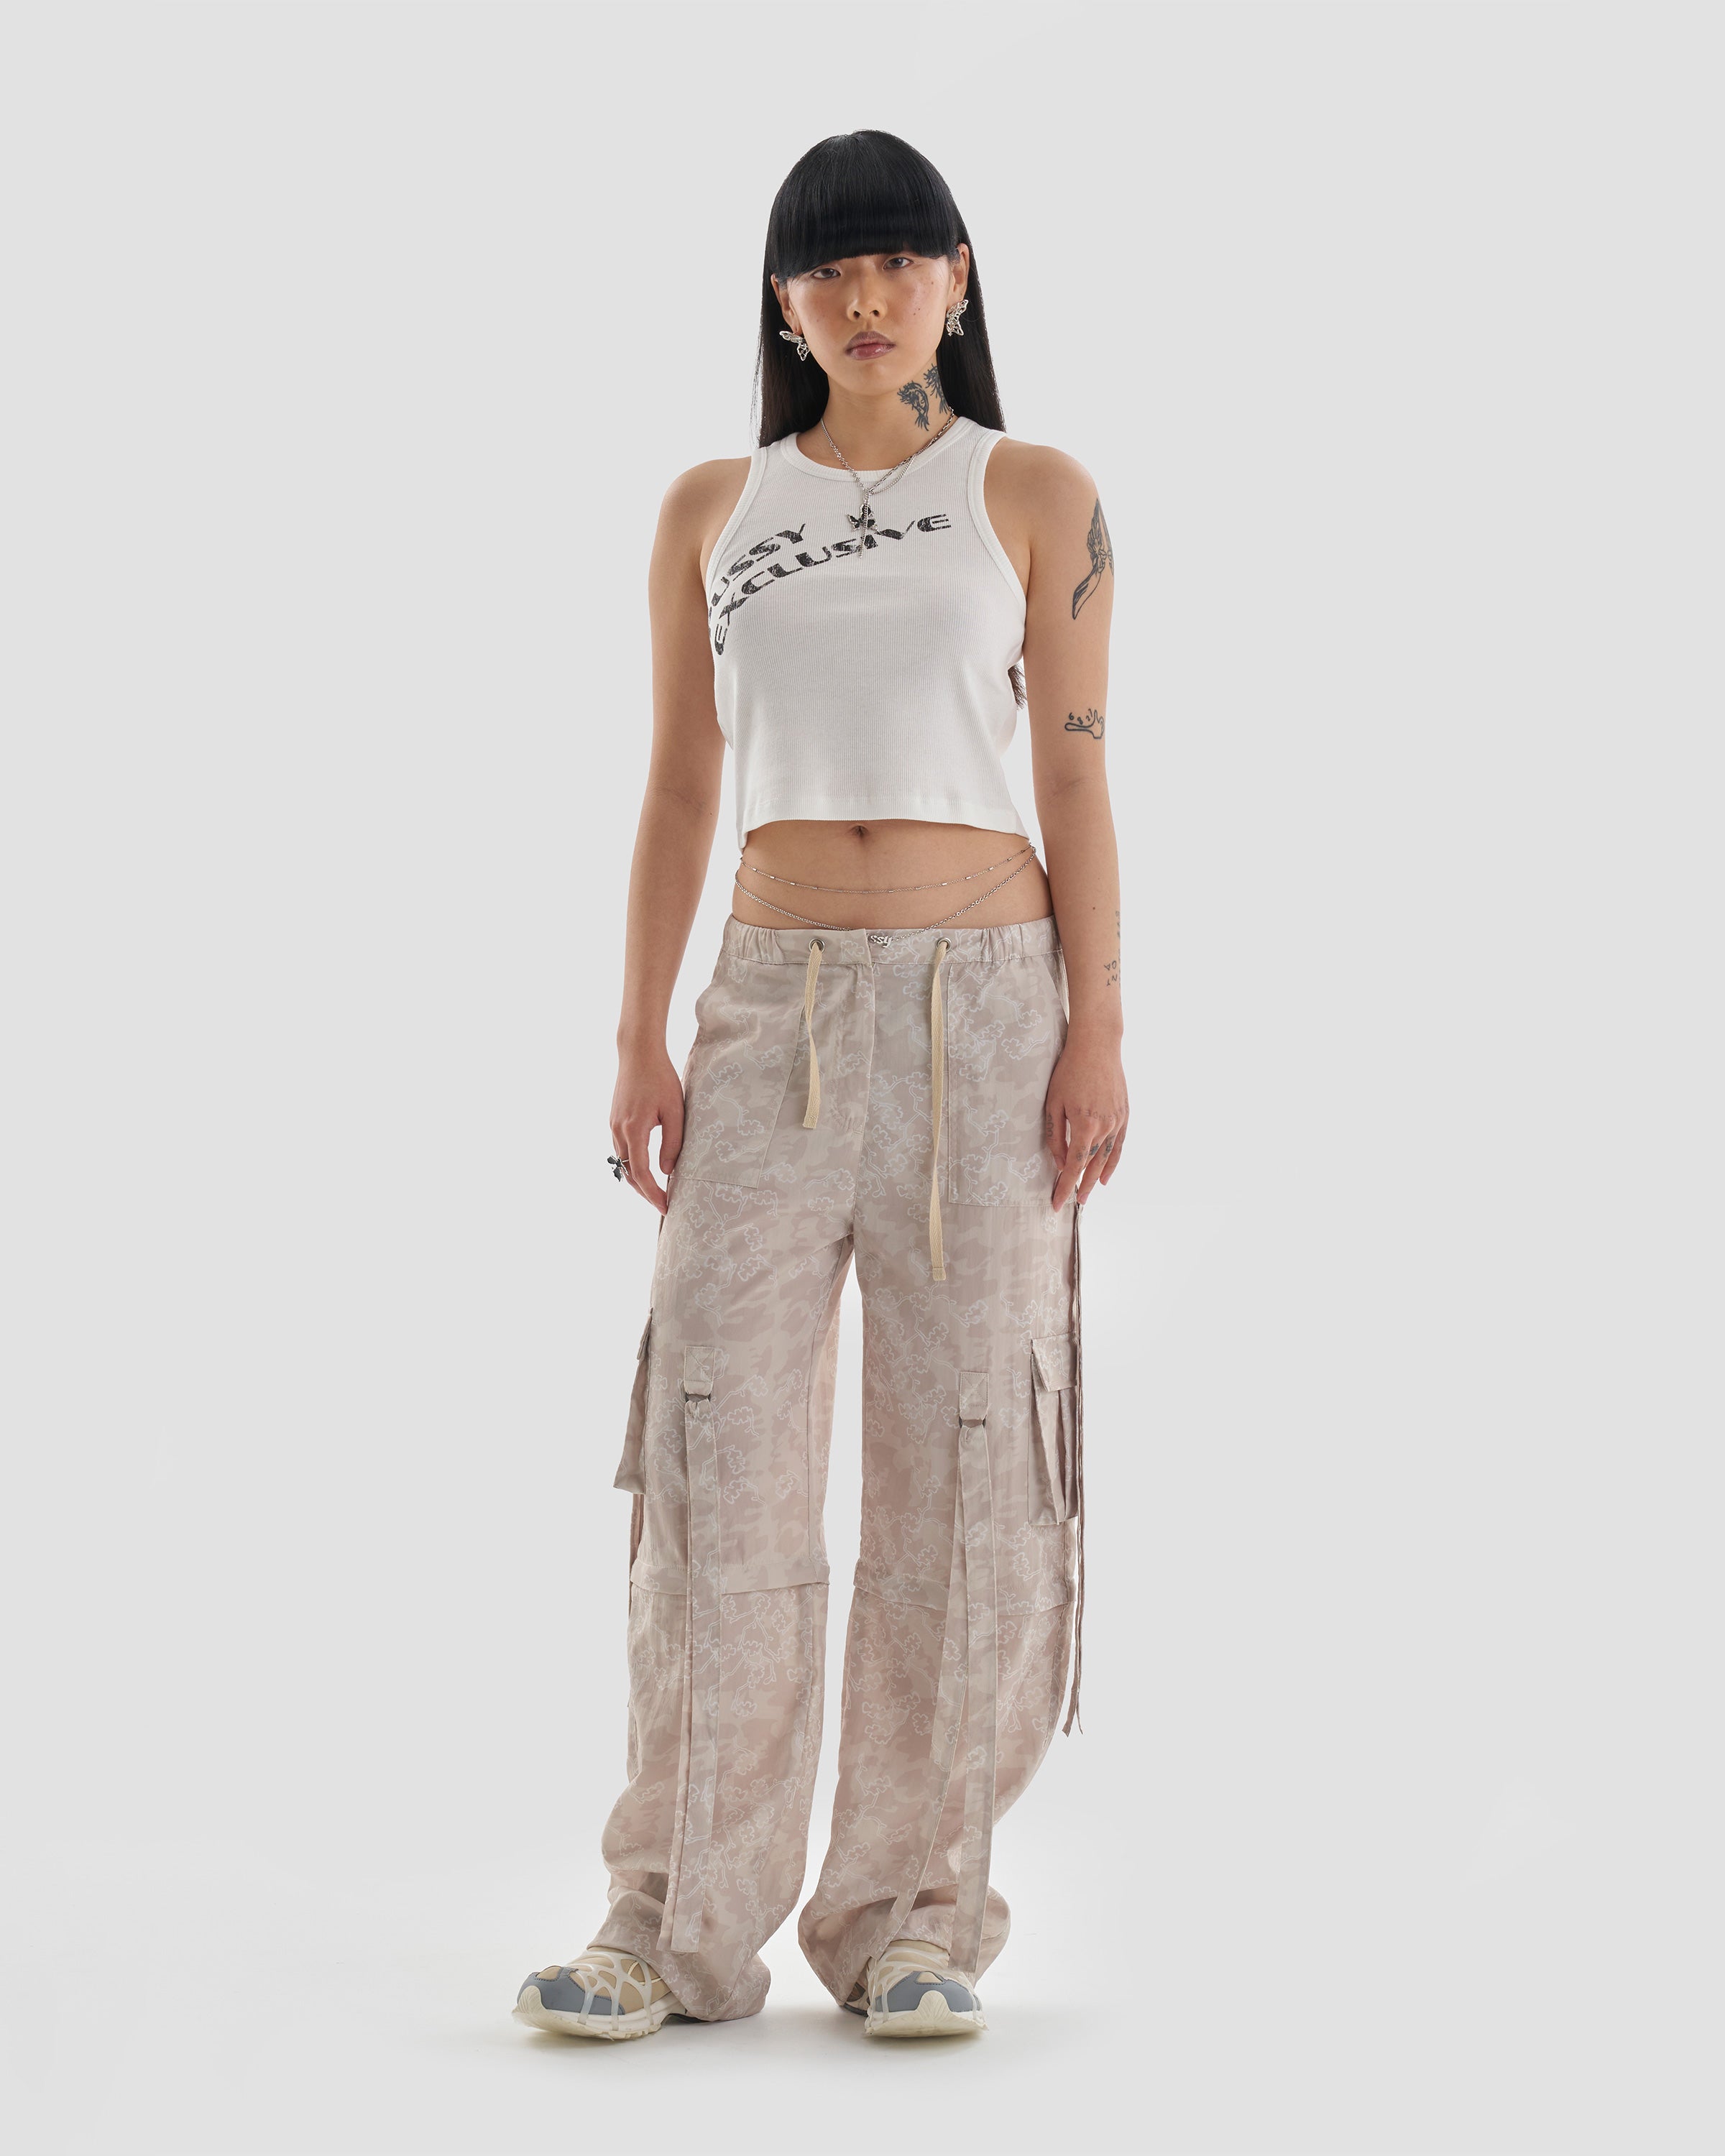 Taboo Zip-Off Cargo Trousers to Shorts with Camo Print in Beige